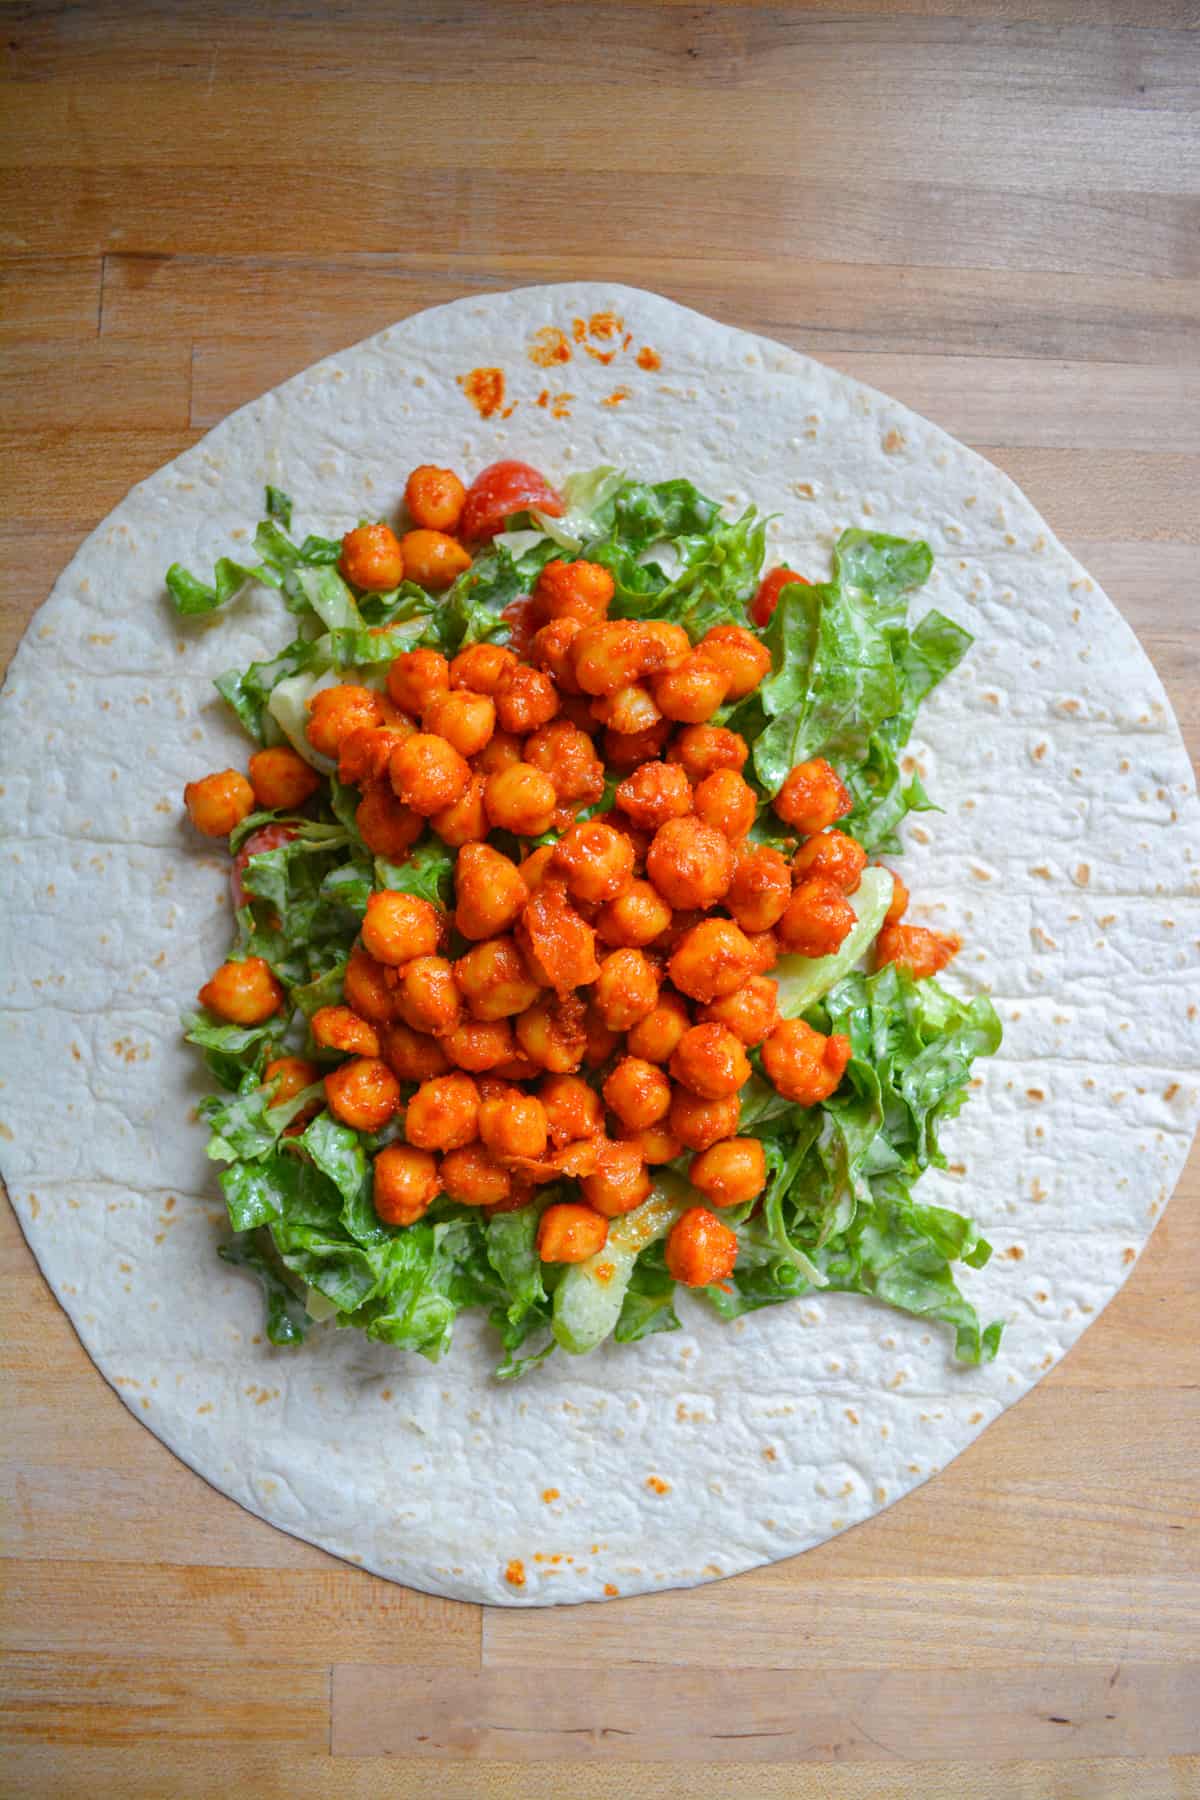 A wrap topped with the ranch salad and buffalo chickpeas.